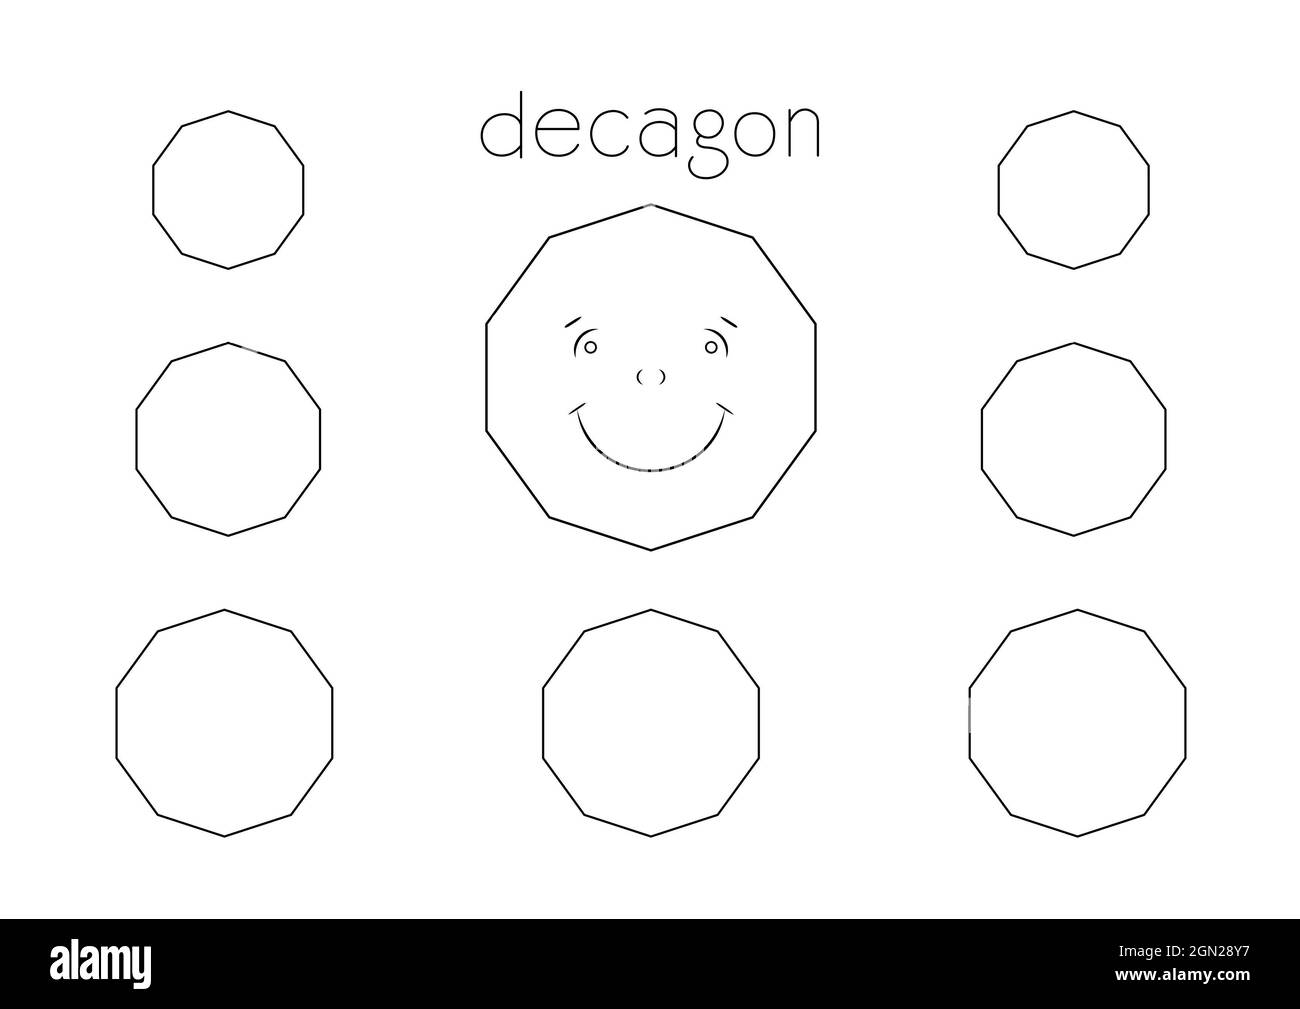 Geometric shape with ten sides coloring page for kids with one big cartoon decagon and more shapes to color outline black and white illustration stock photo